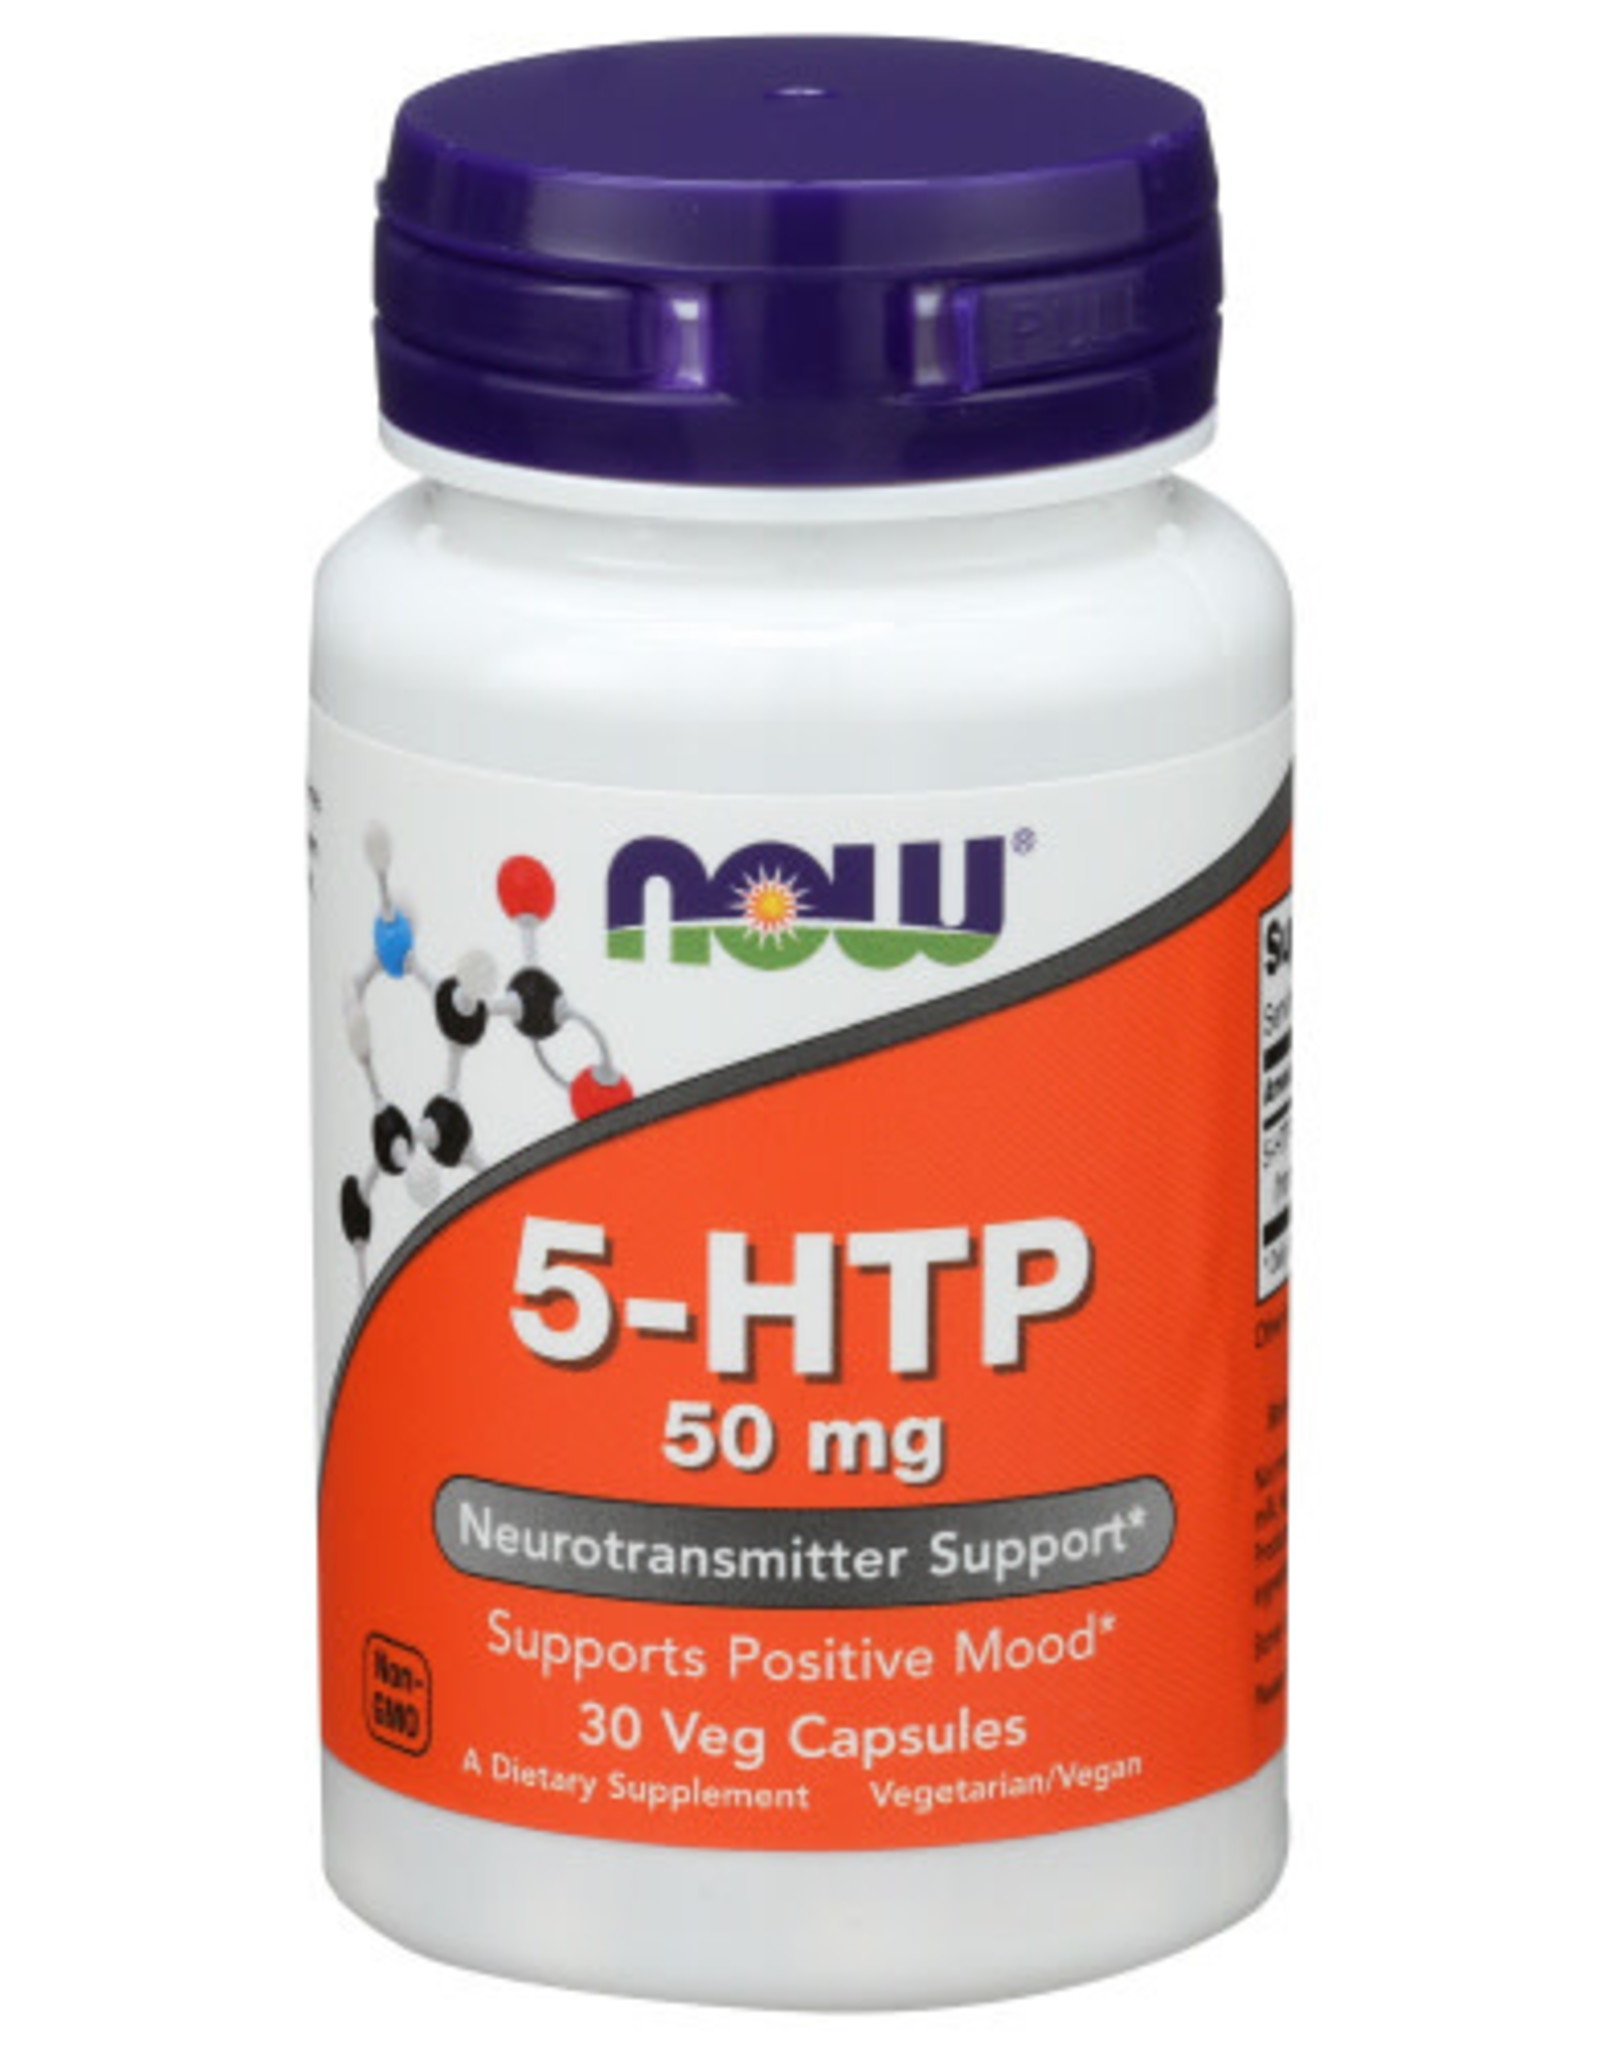 NOW® NOW FOODS 5-HTP 50 MG, 30 CAPSULES